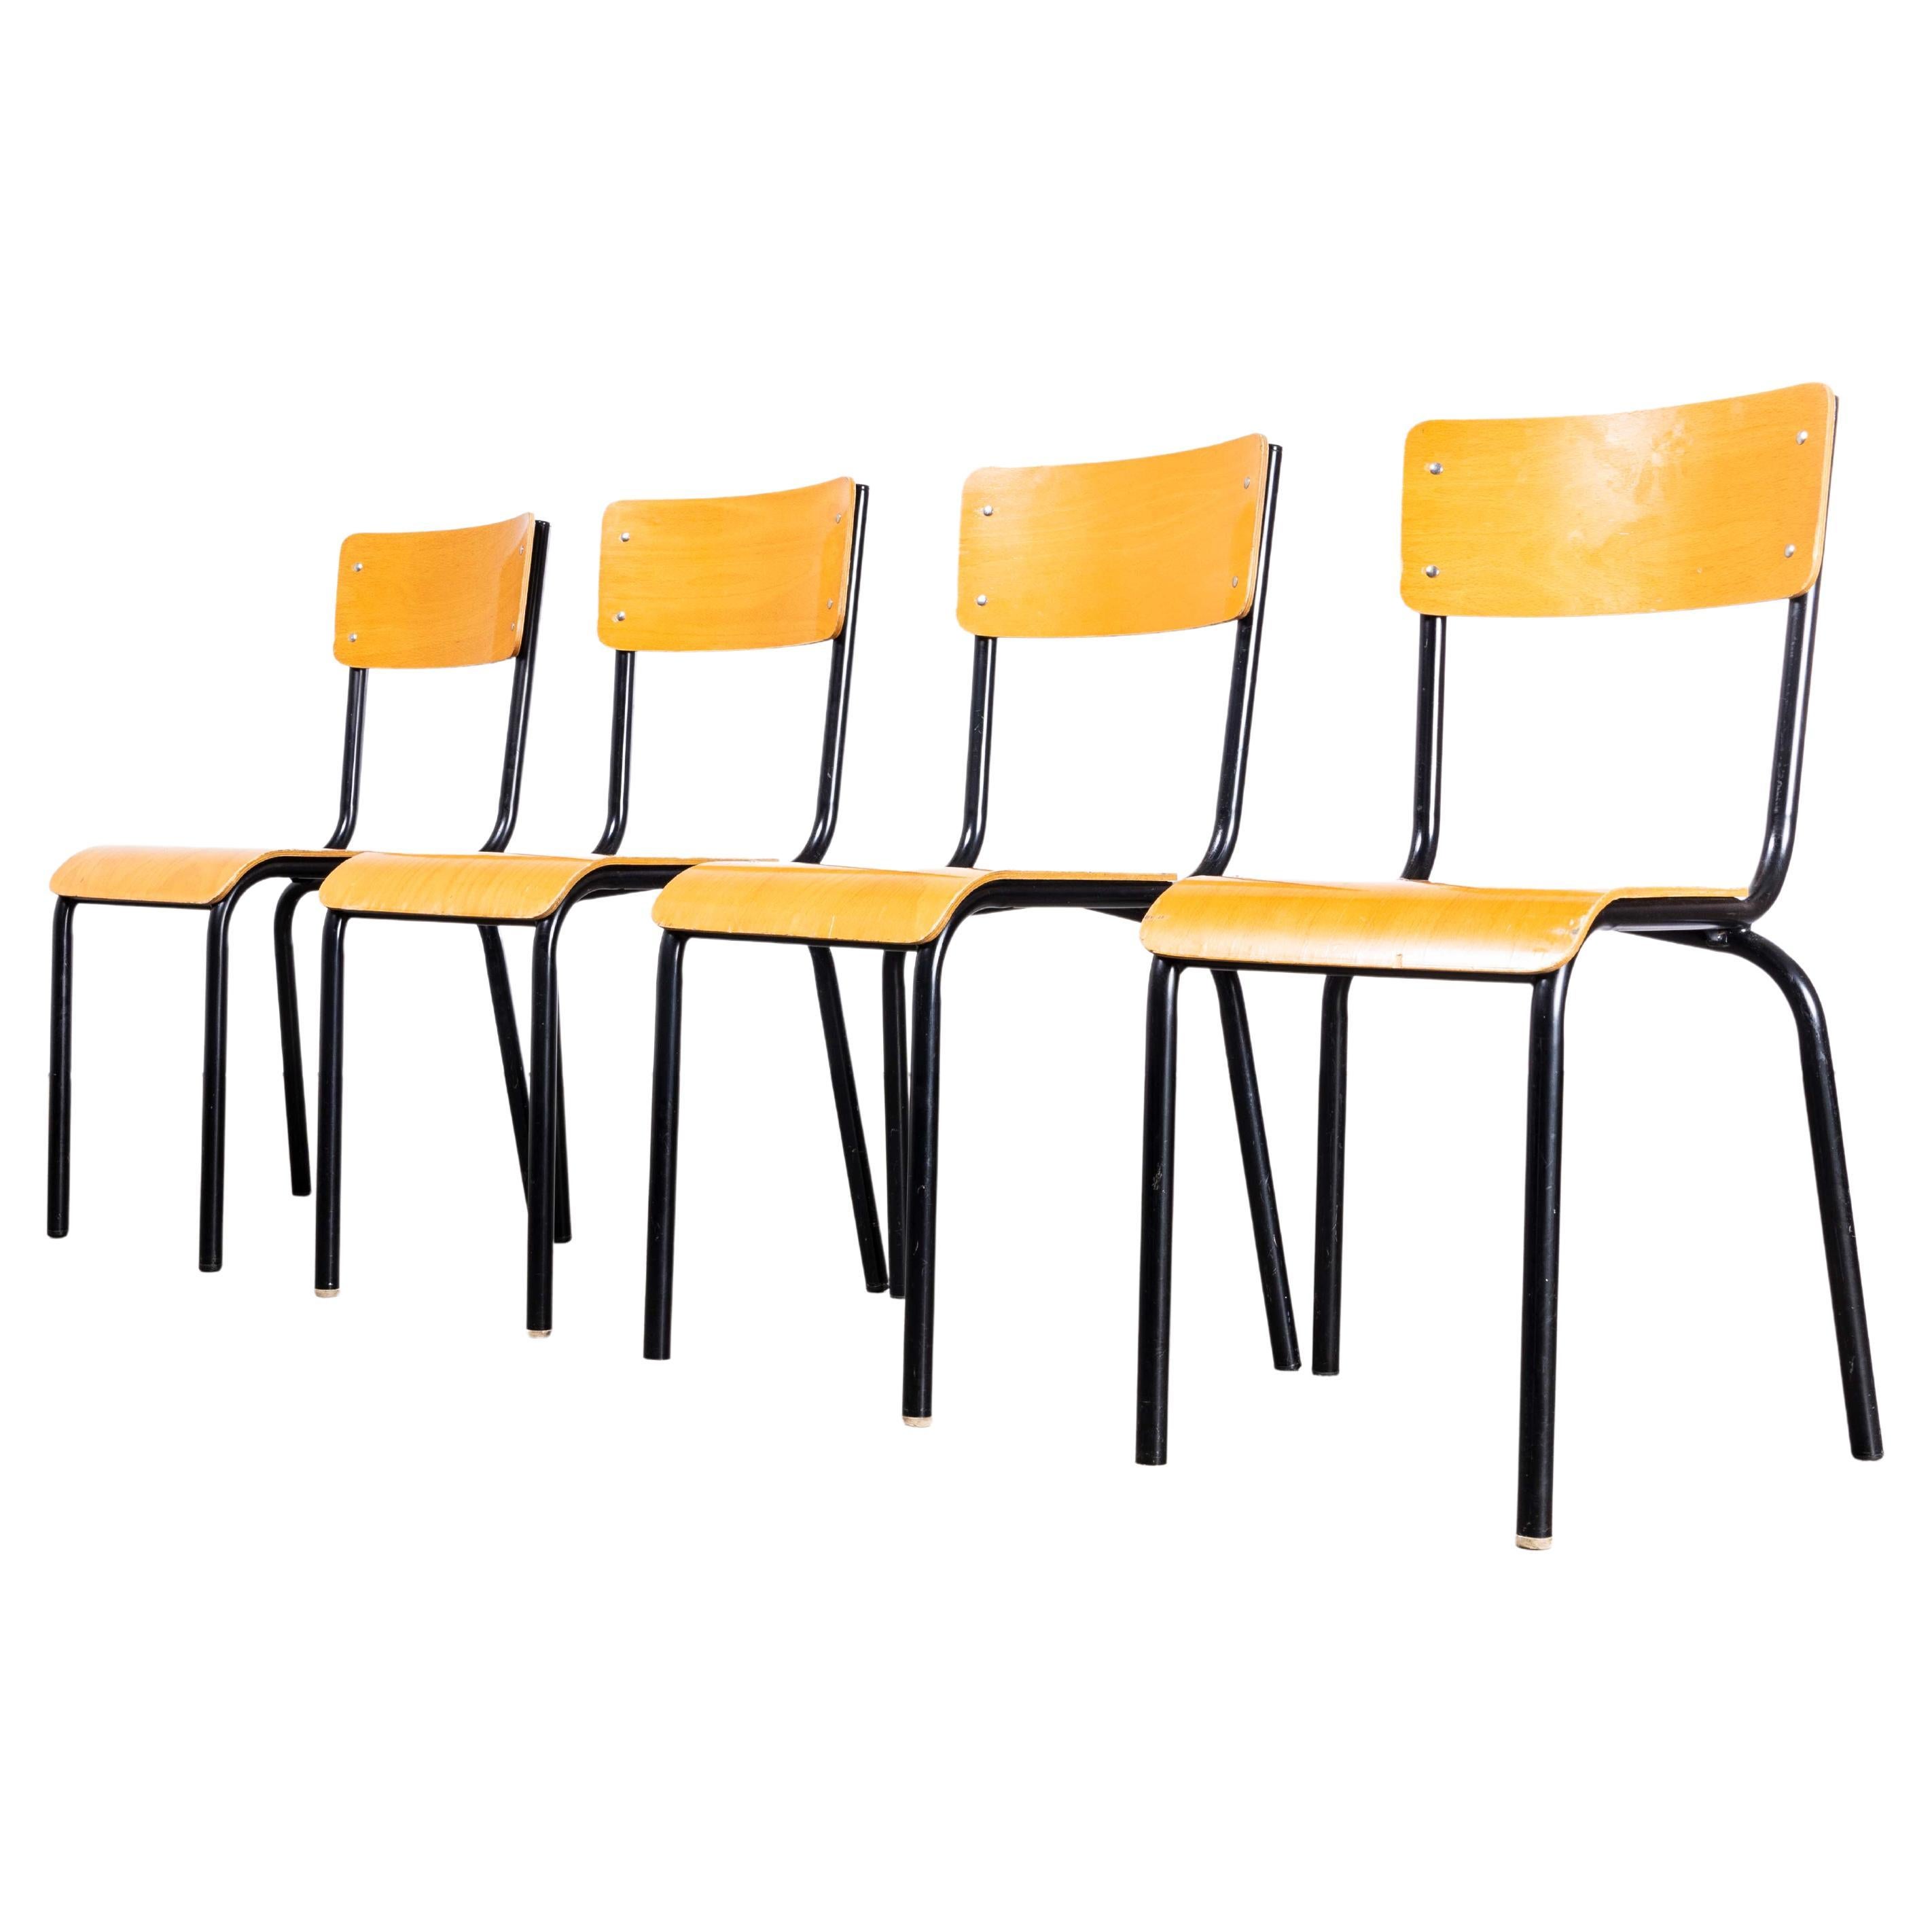 1960's Original Black French Stacking University Chairs Wide Back - Set Of Four